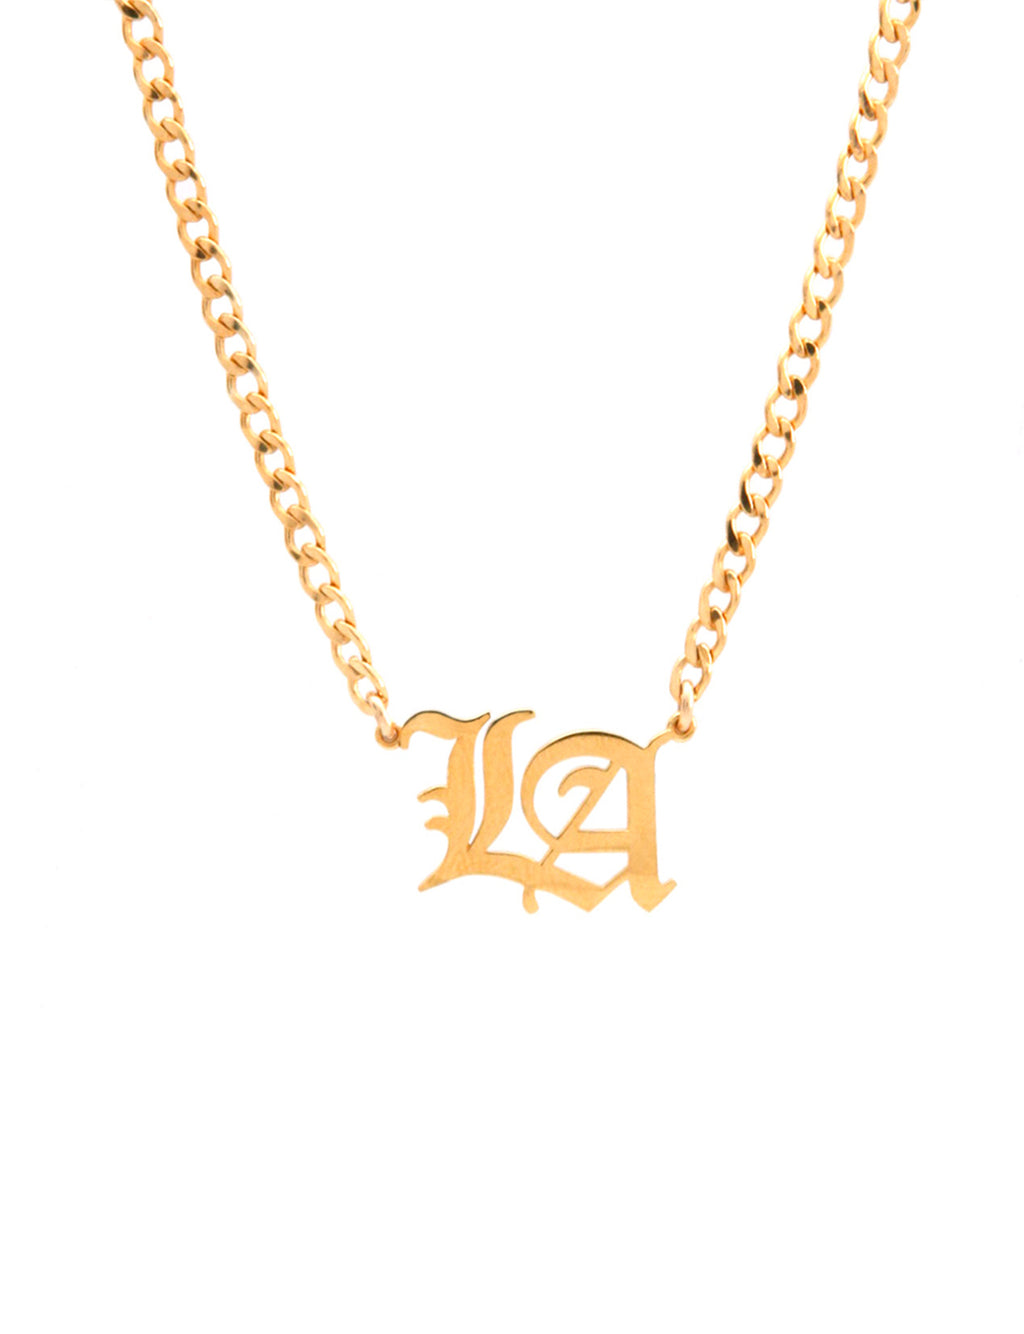 Old English LA Necklace, Gold